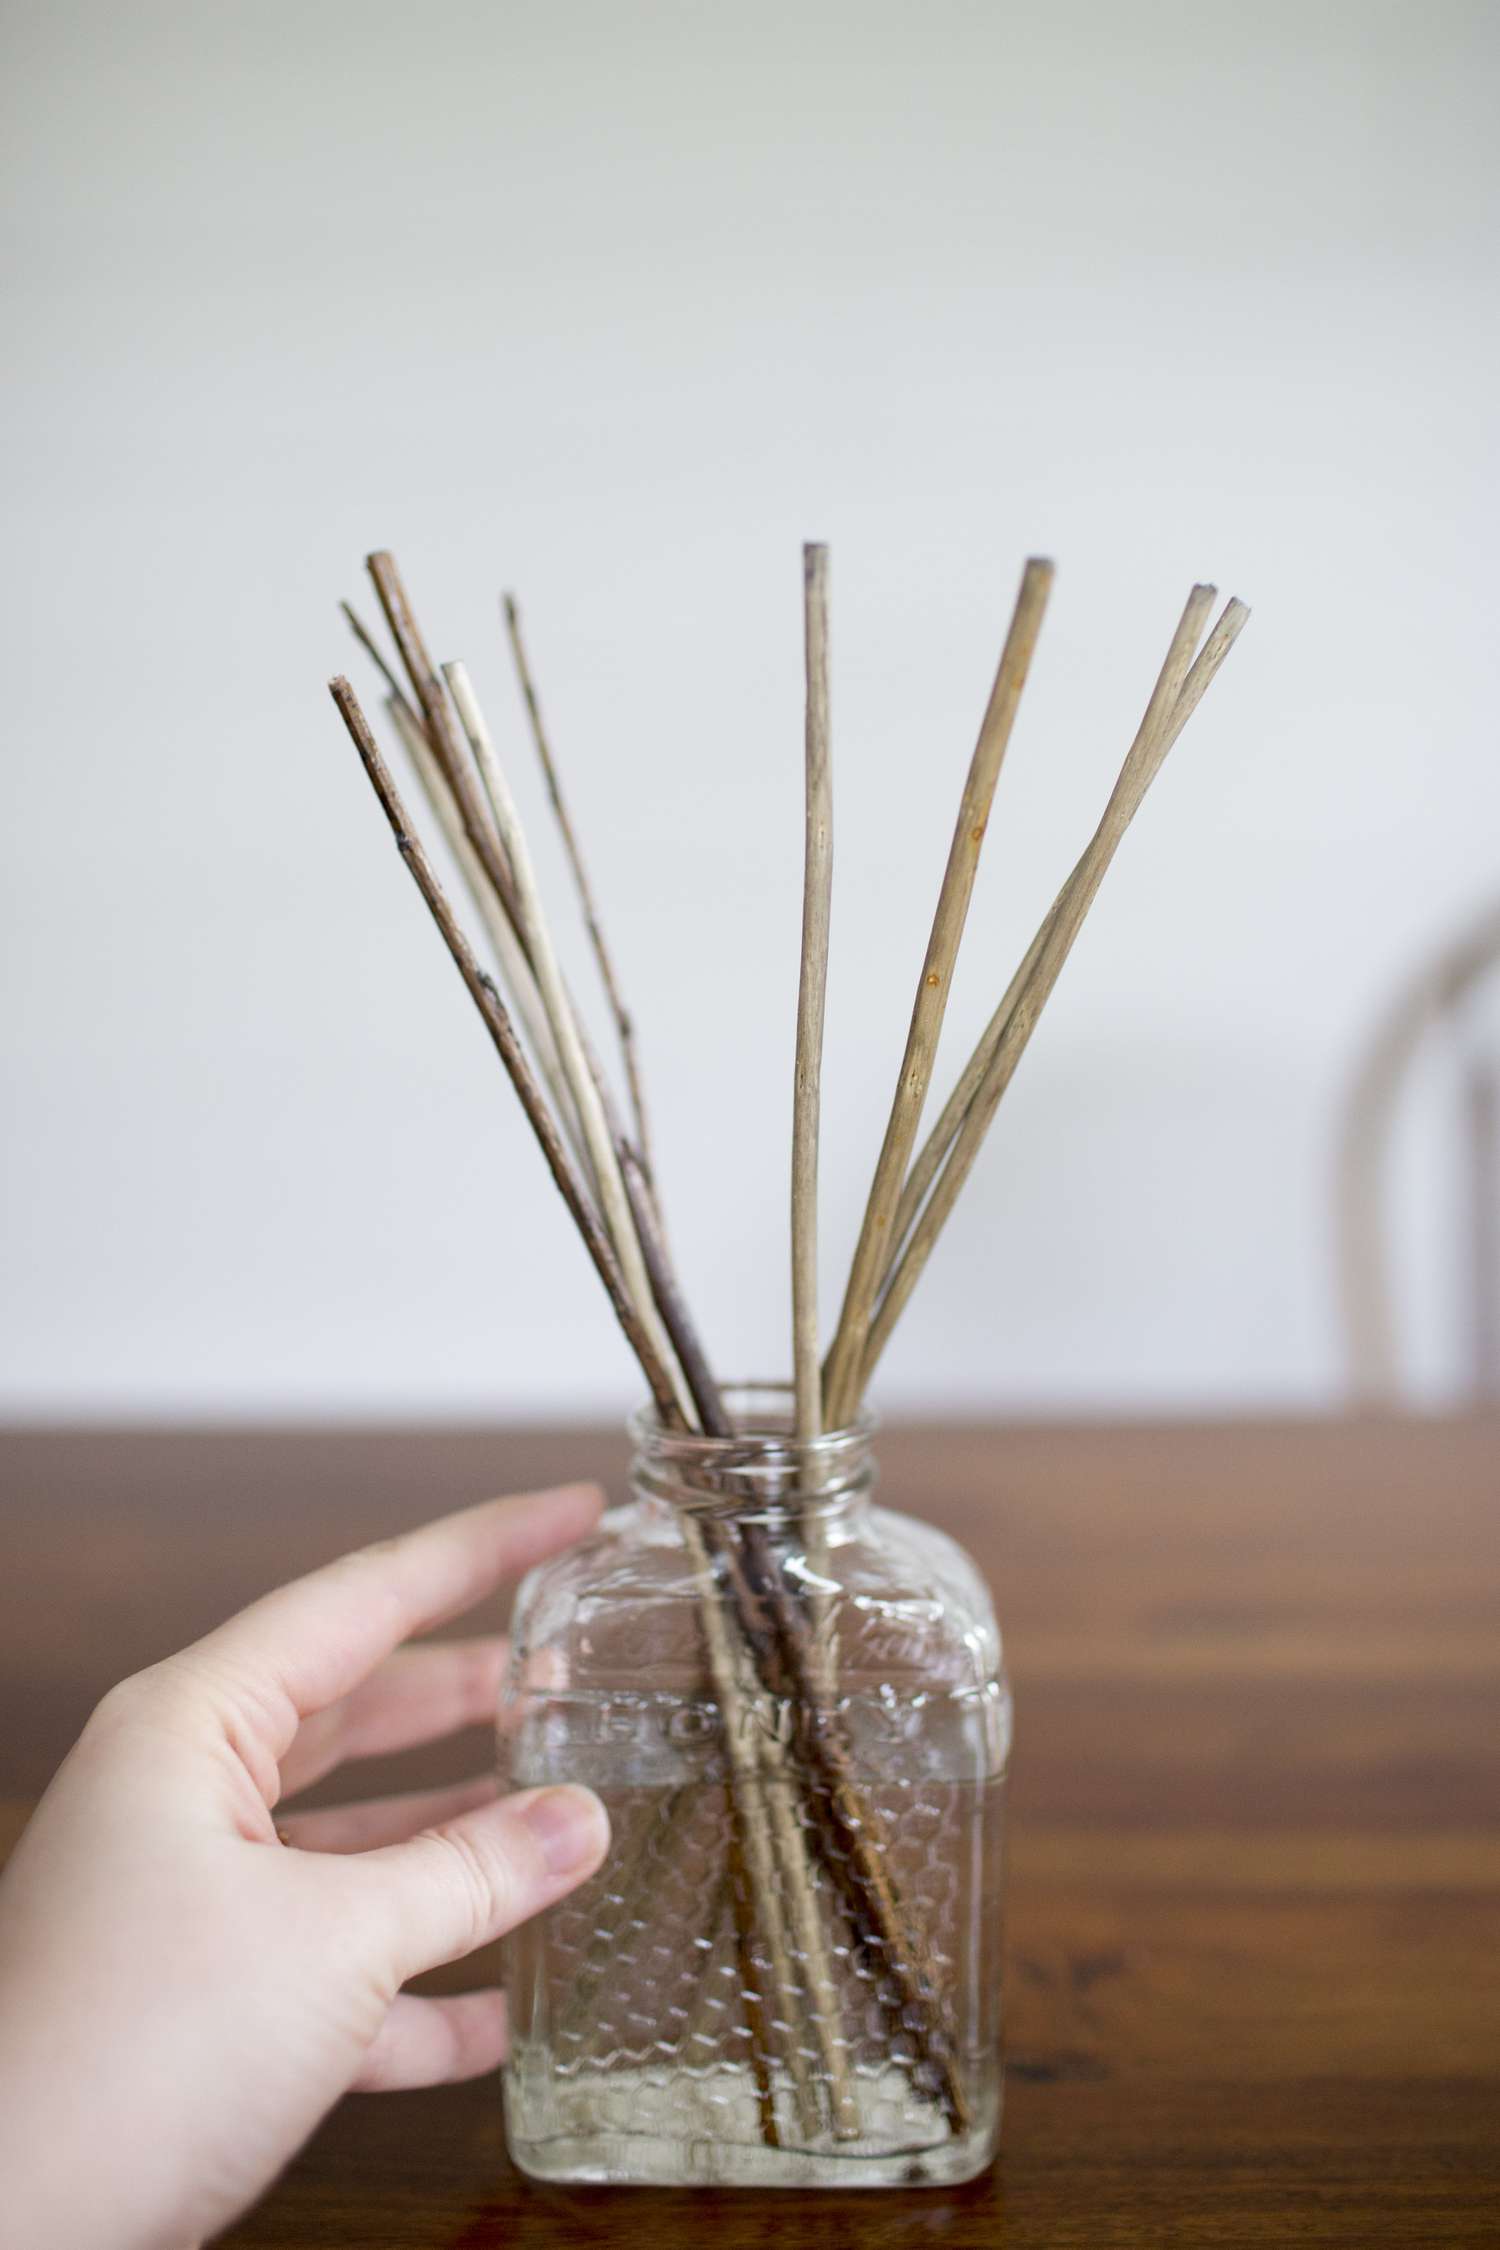 Adding twigs to the diffuser bottle.